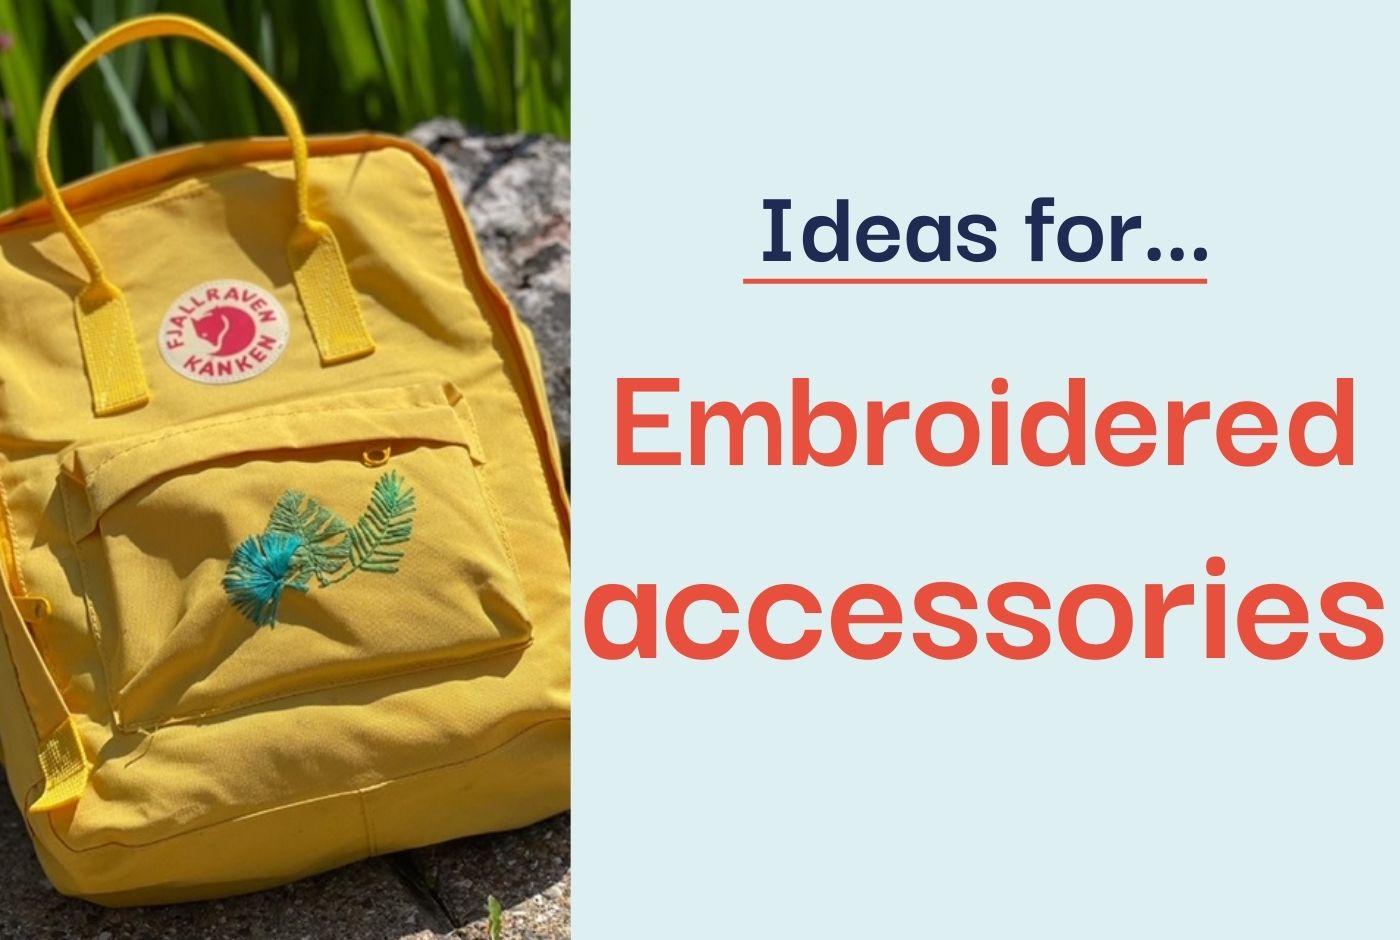 A yellow backpack embroidered with leaf designs against a grassy backdrop.